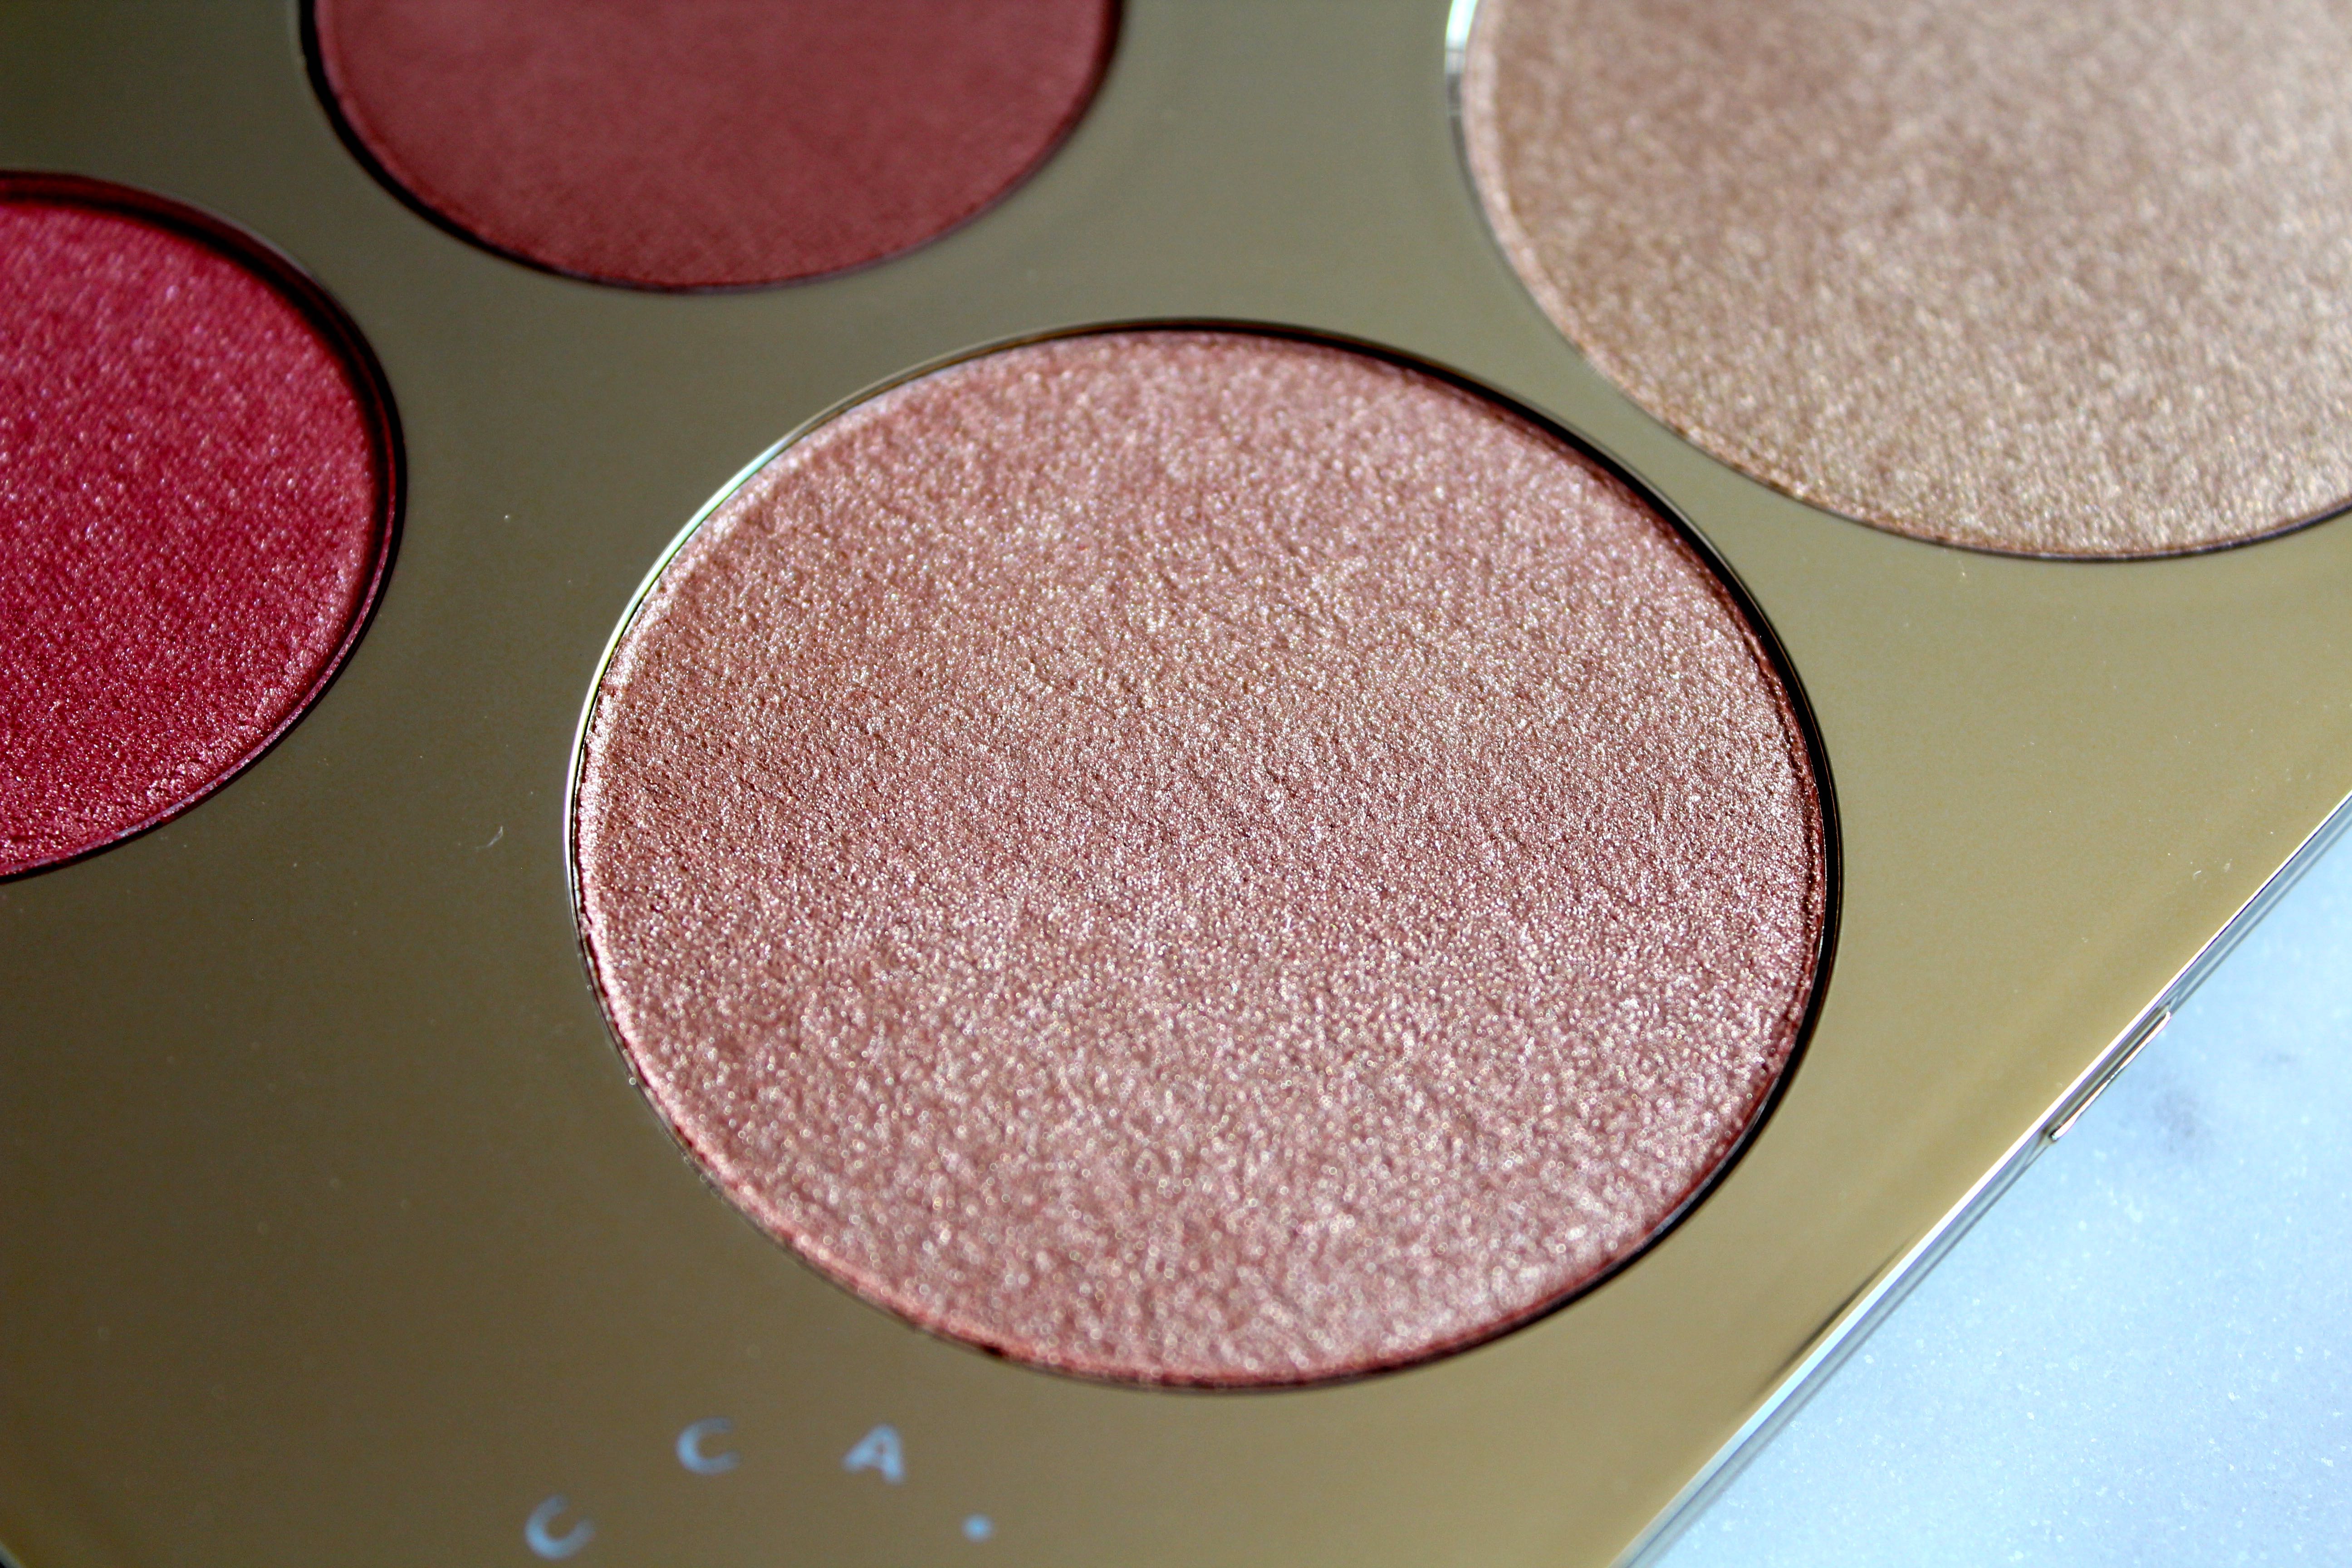 Becca X Jaclyn Hill Champagne Collection Face Palette Review & Swatches by Facemadeup.com